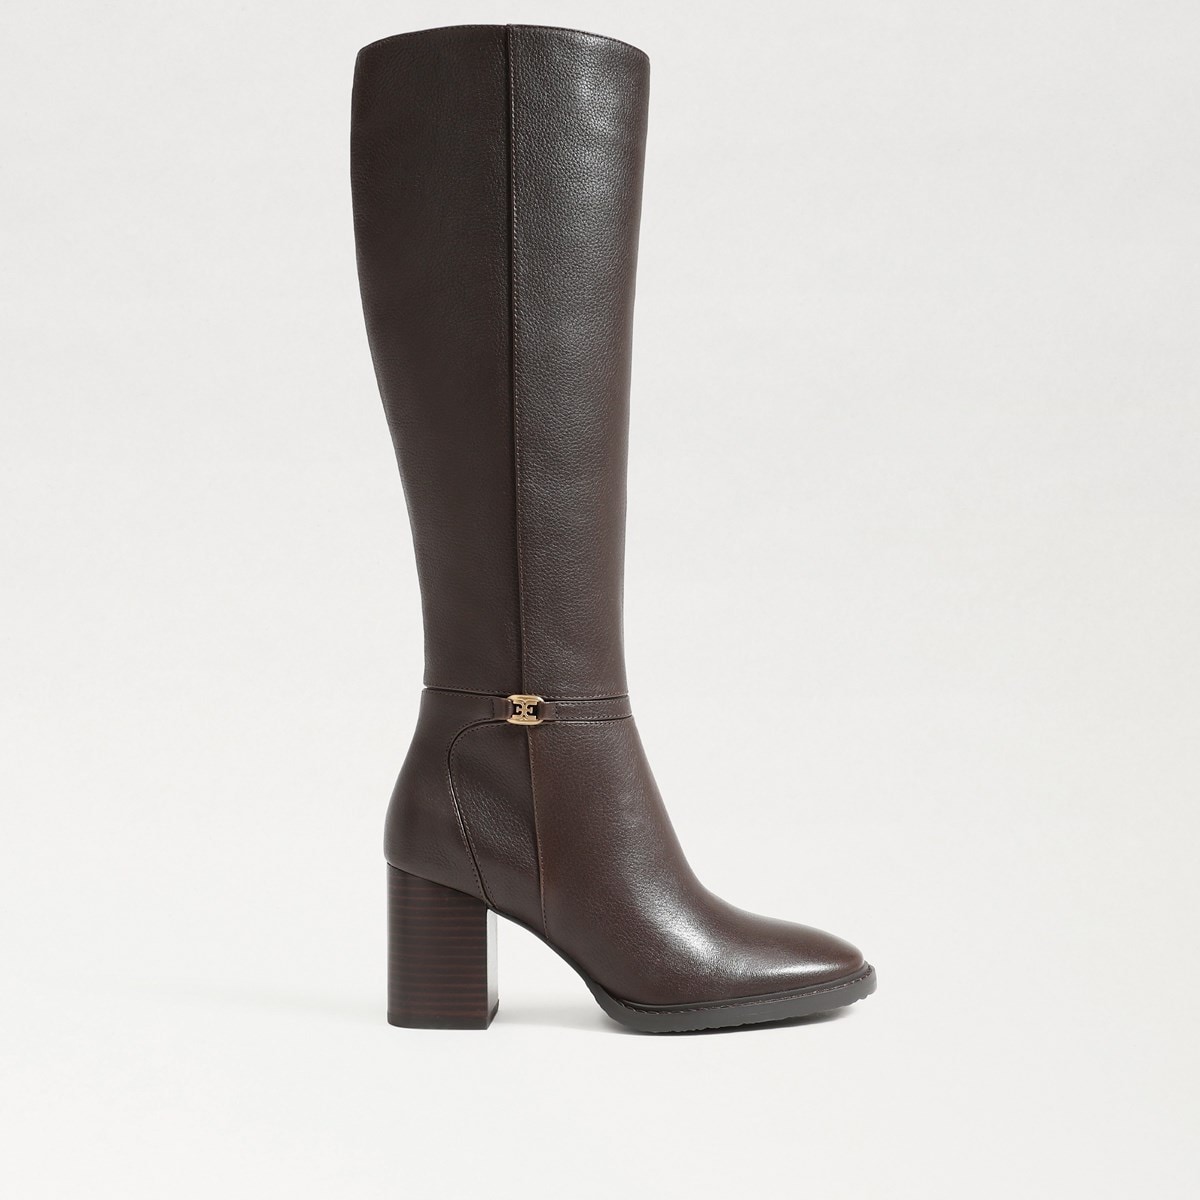 Sam Edelman Elsy Knee High Boot | Women's Boots and Booties